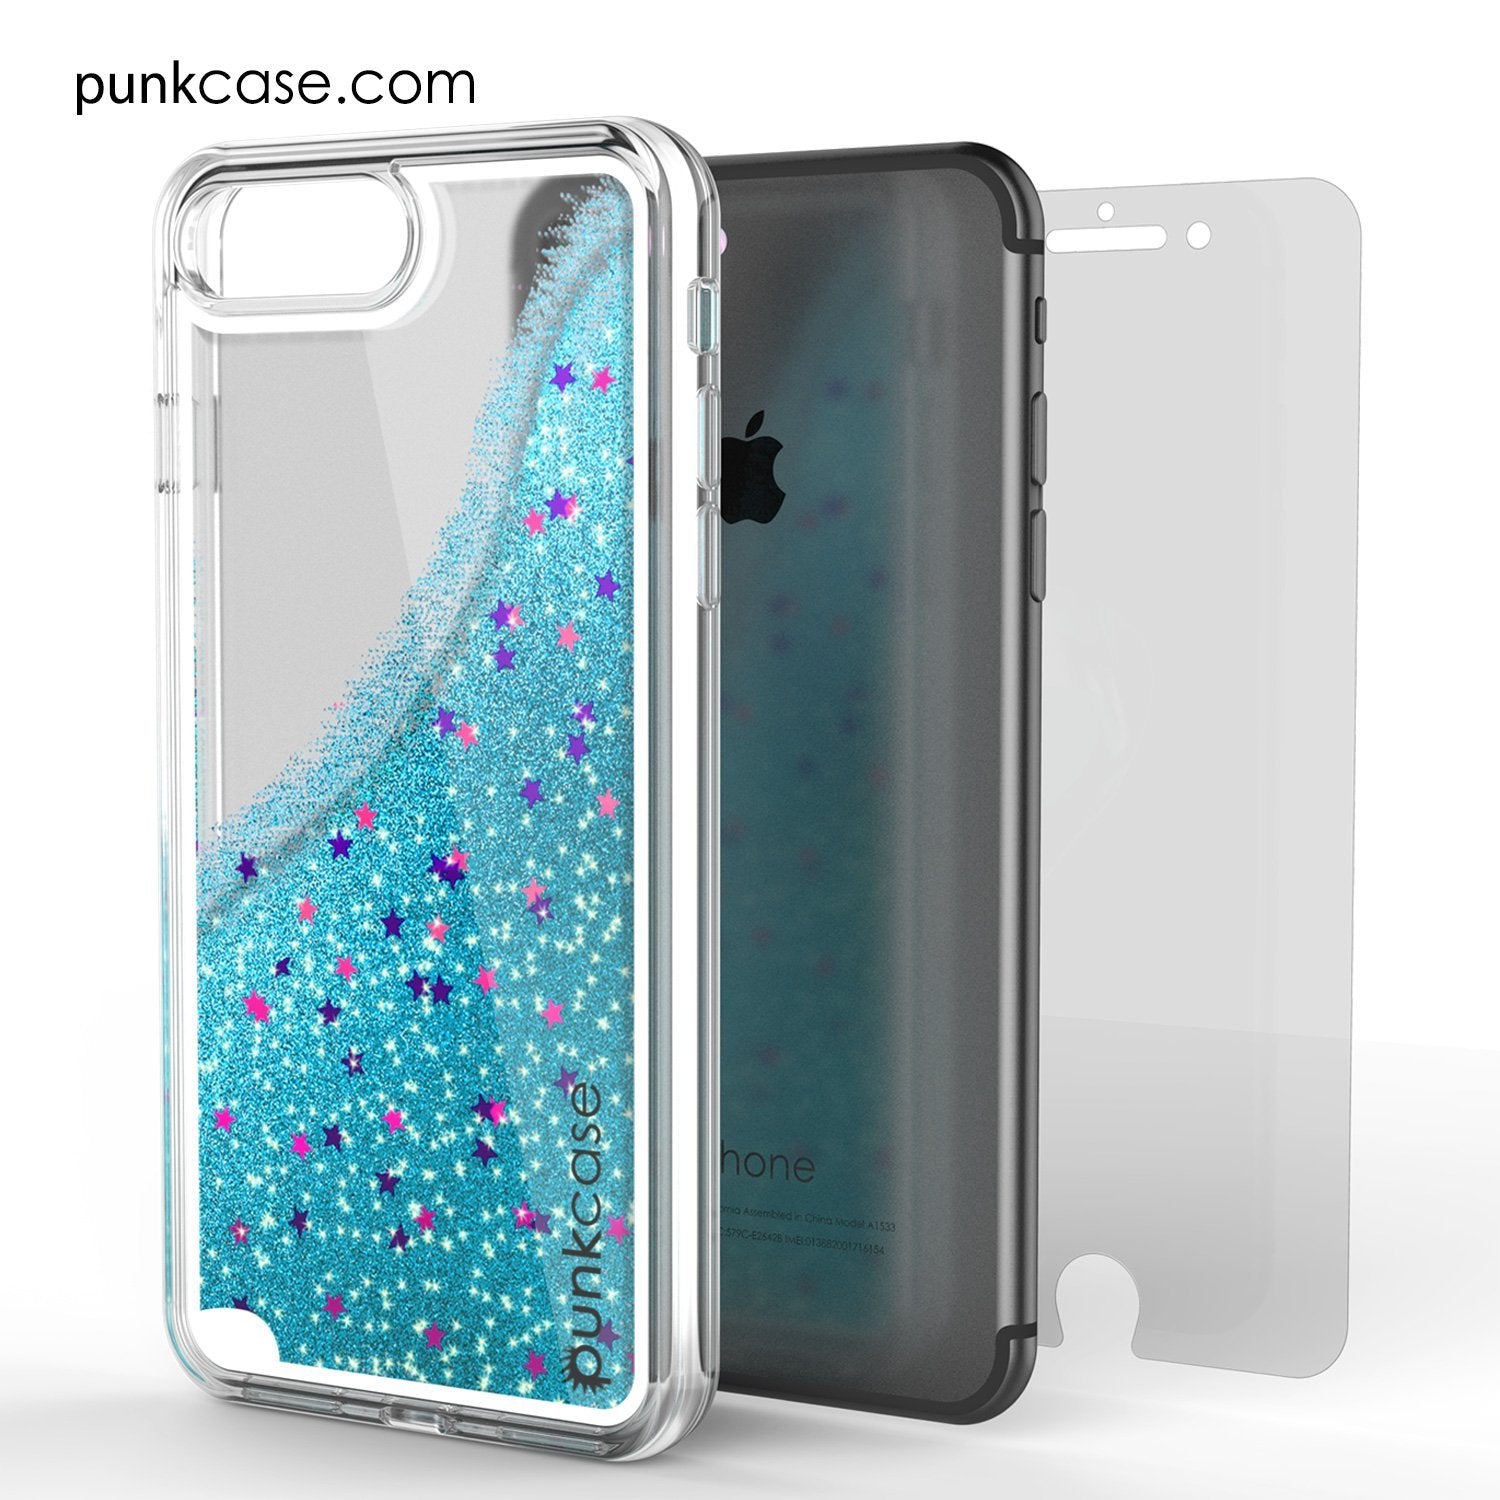 iPhone 8+ Plus Case, PunkCase LIQUID Teal Series, Protective Dual Layer Floating Glitter Cover - PunkCase NZ